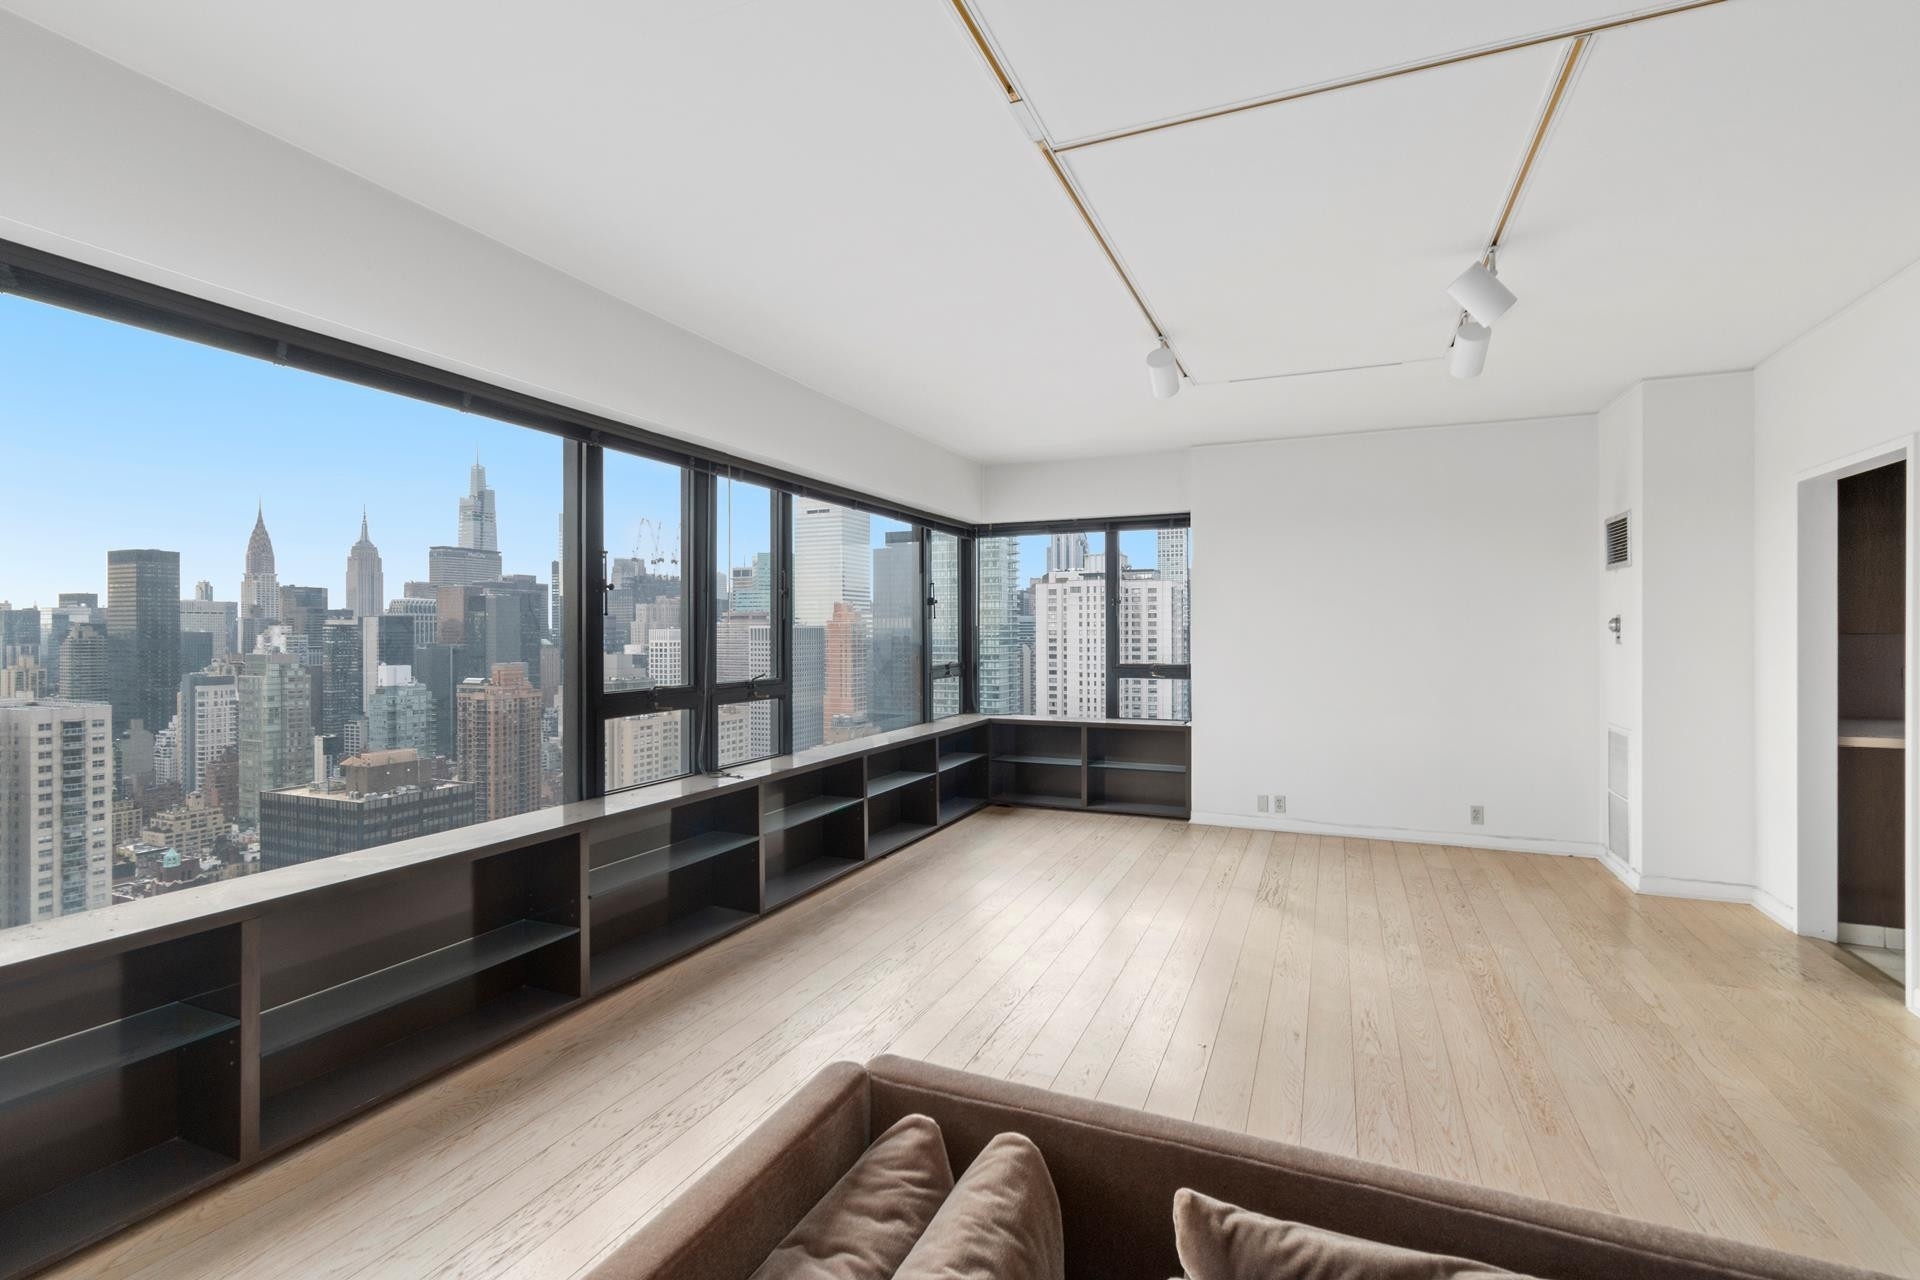 Property at The Sovereign, 425 E 58TH ST, 42C/43C Sutton Place, New York, NY 10022